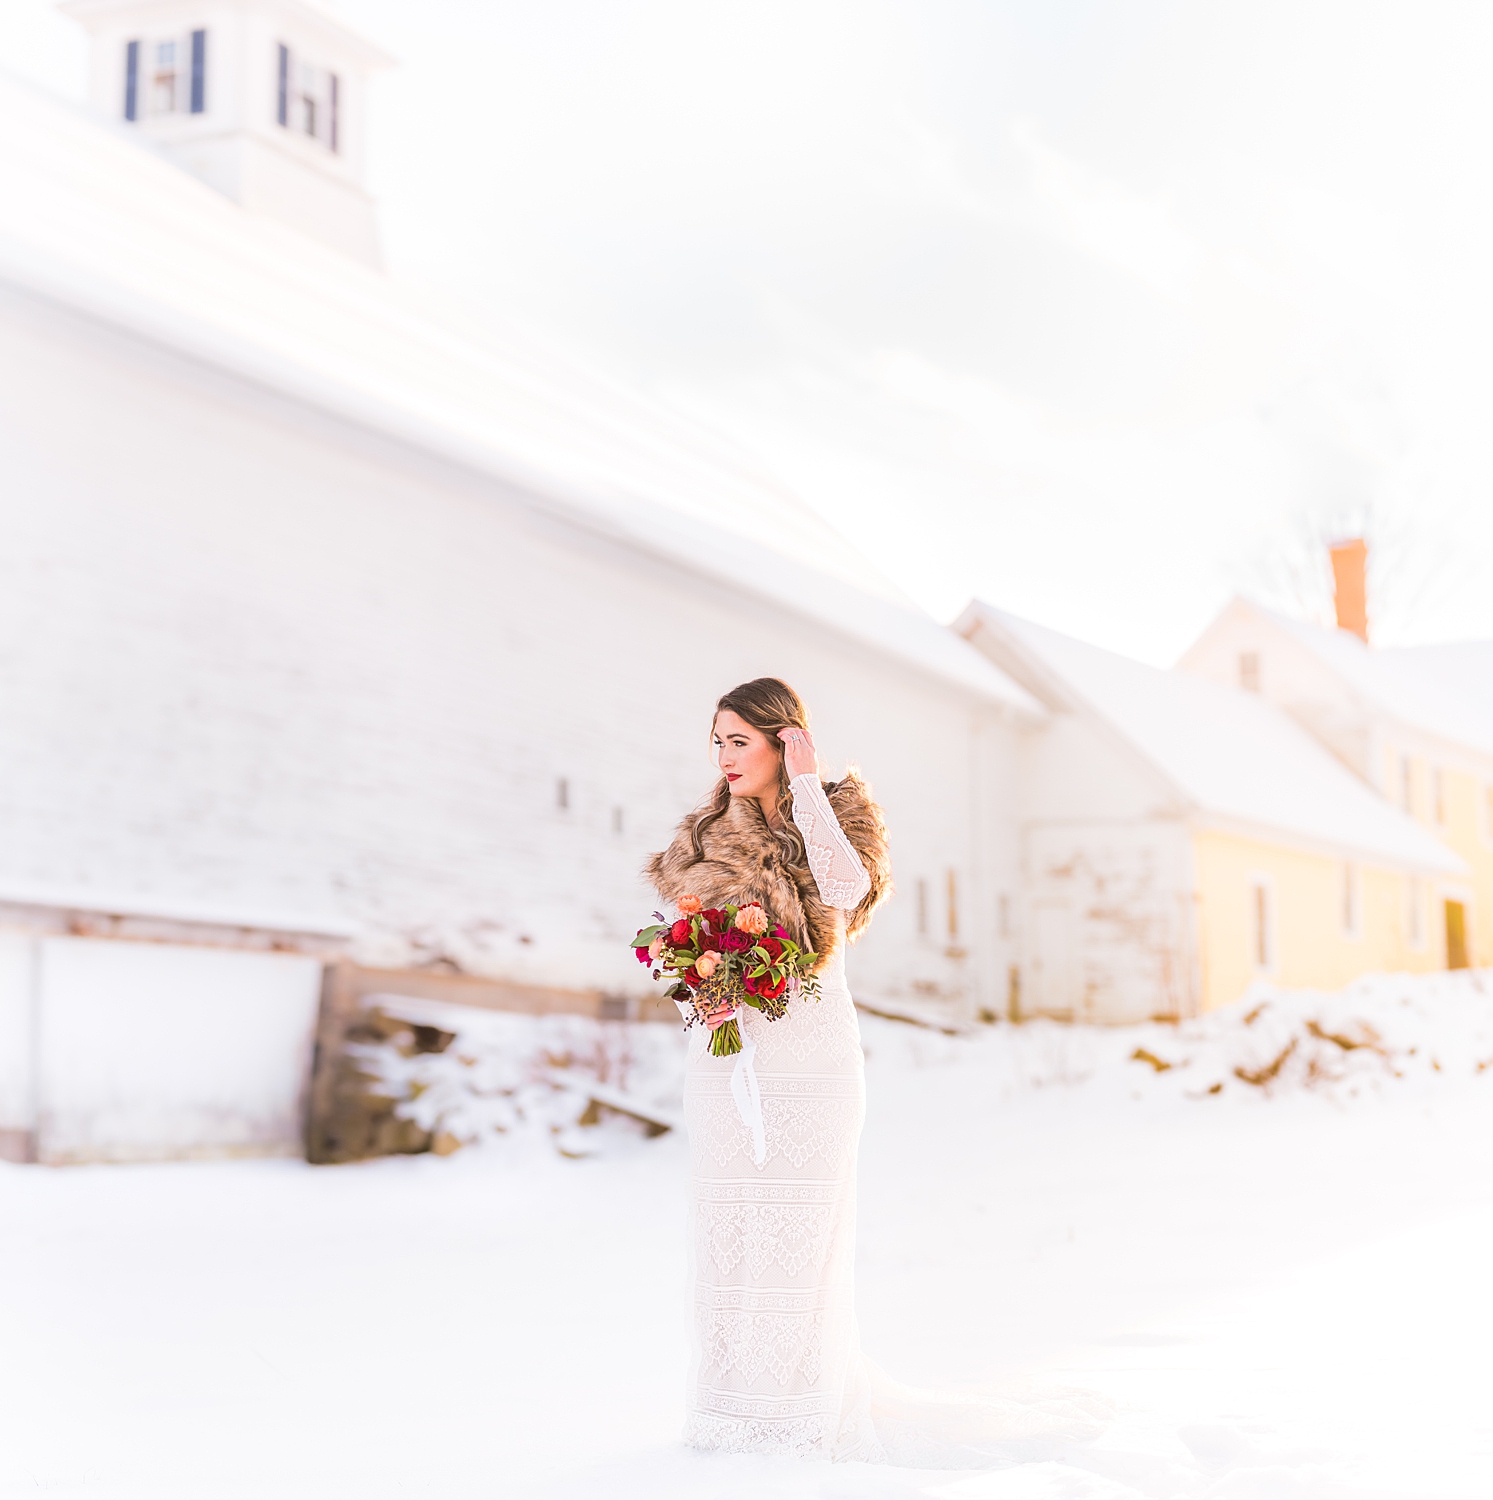 NH winter styled shoot